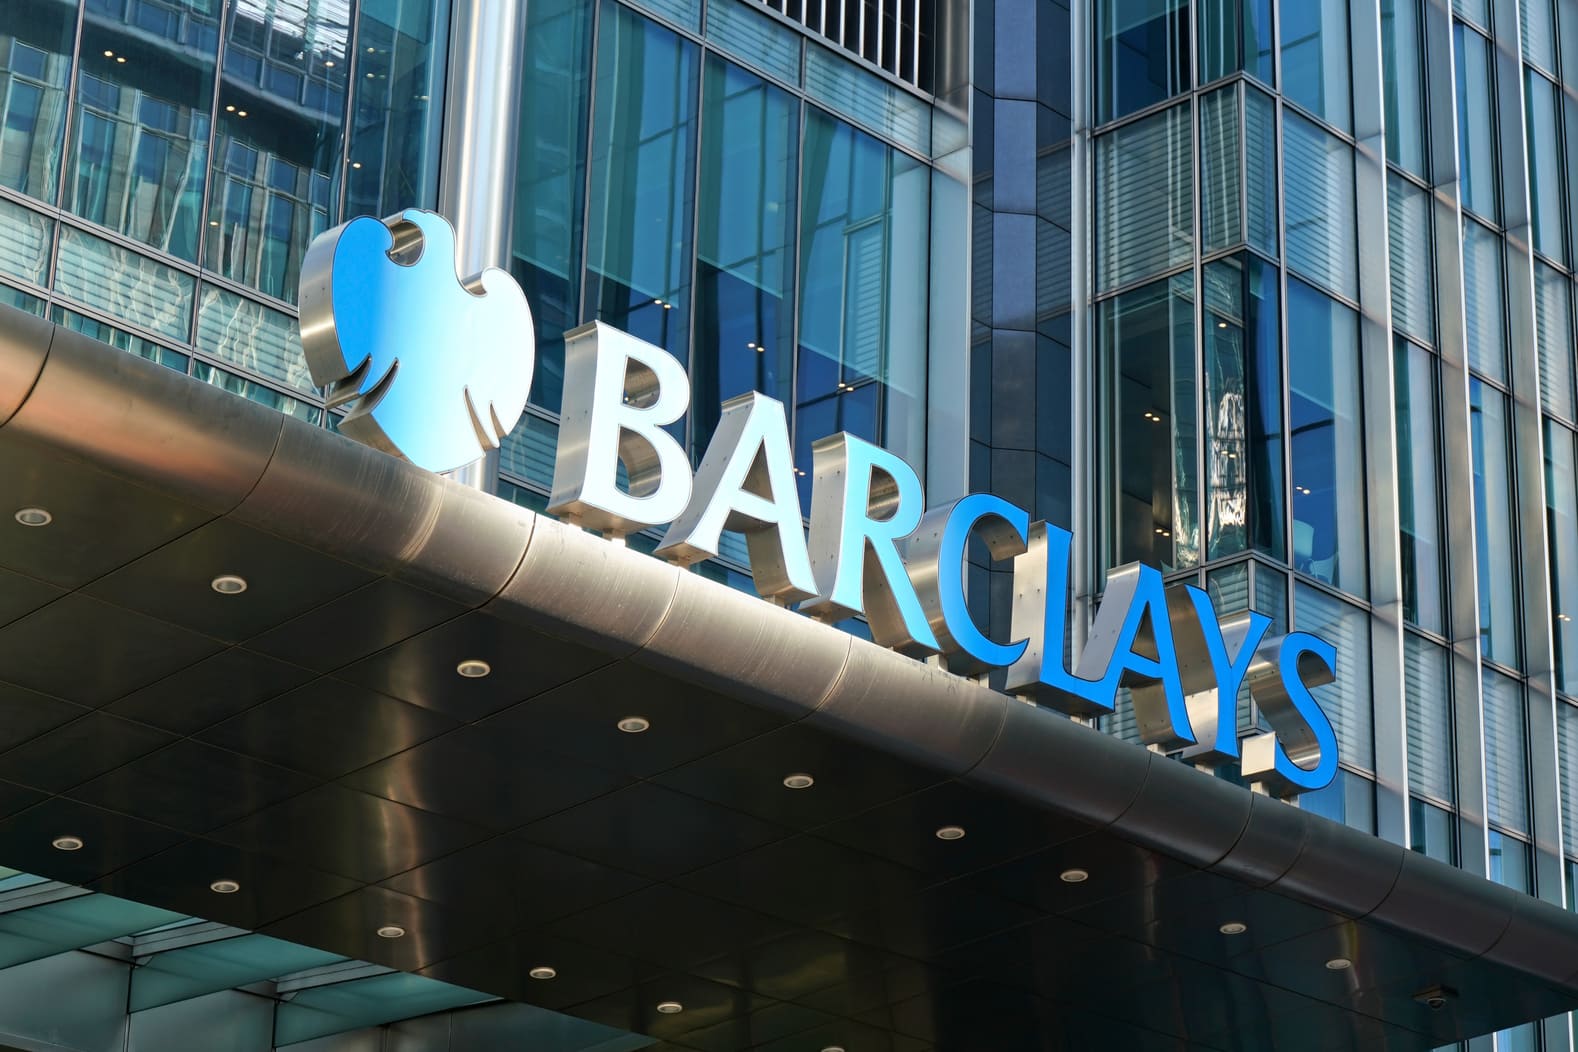 UK-Based Bank Barclays to Acquire Crypto Firm Copper